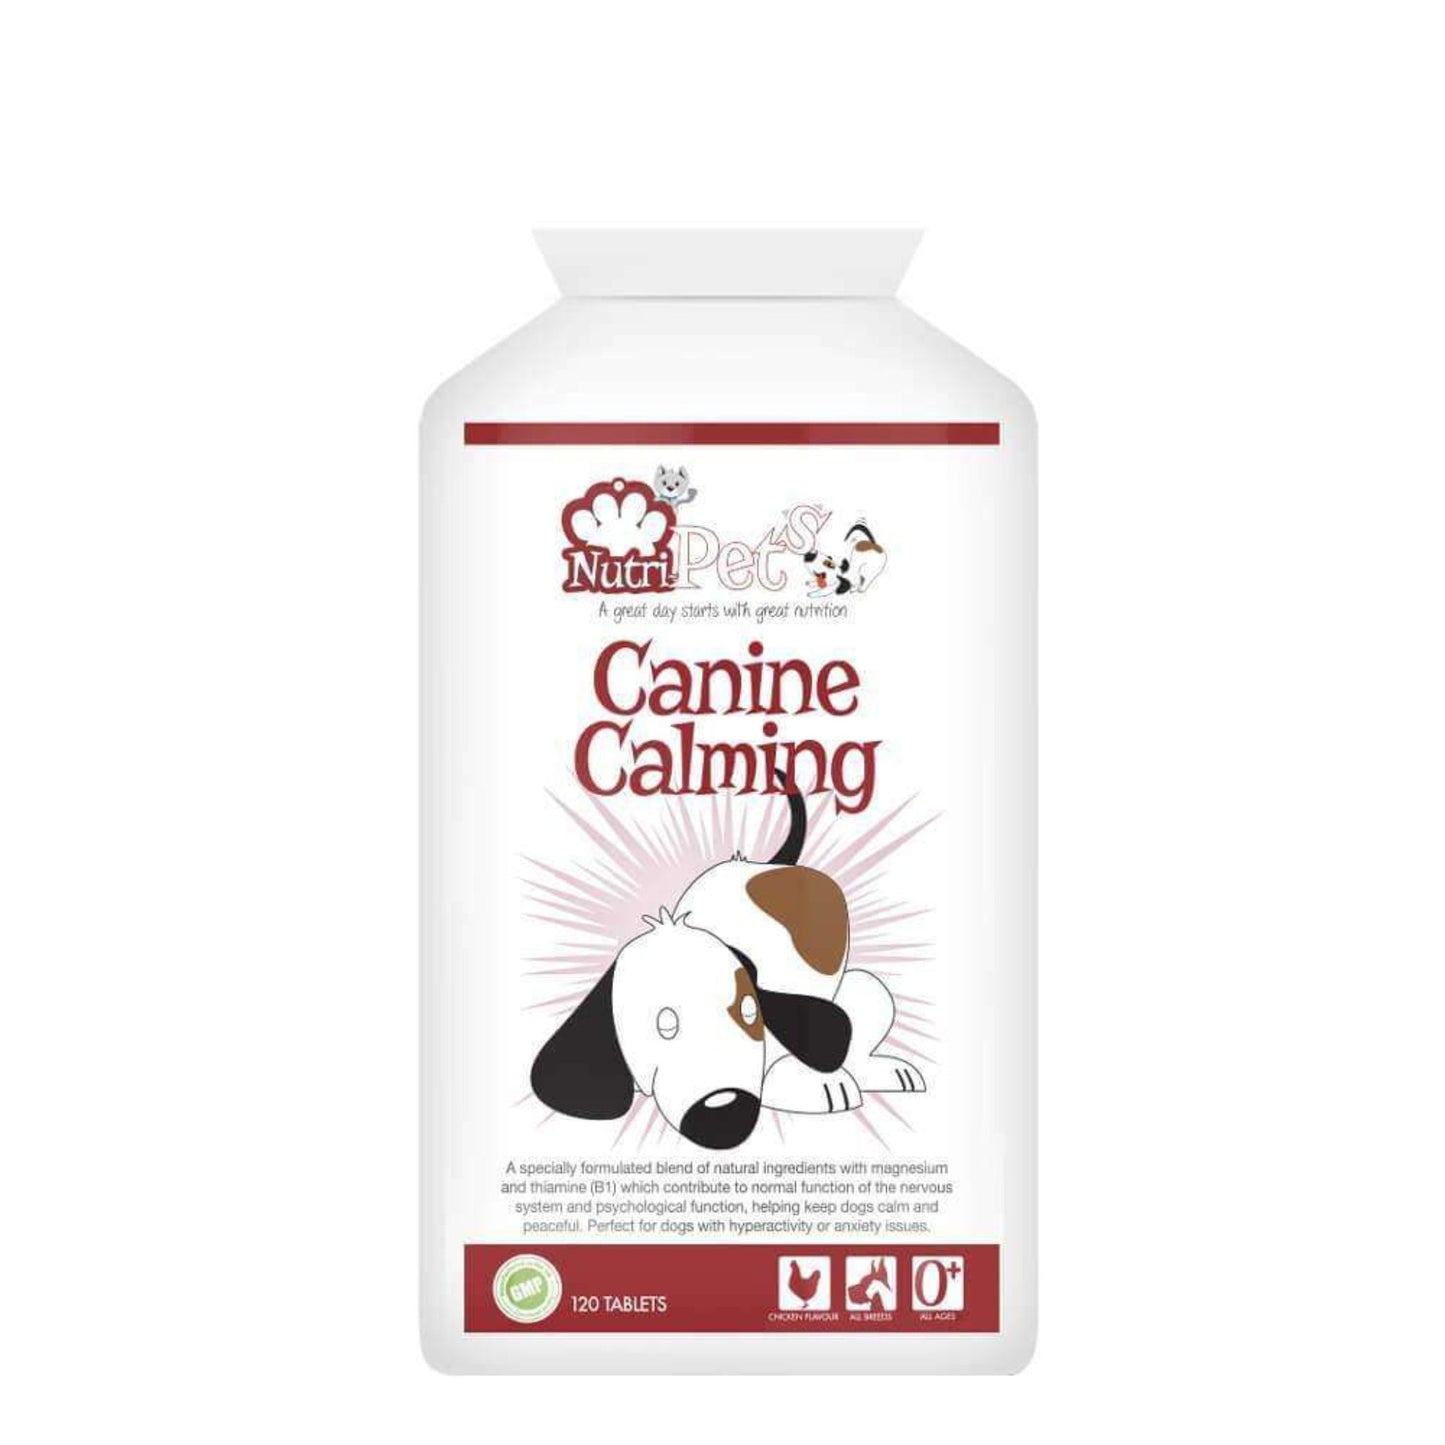 Nutri-Pets Canine Calming comes as 120 tablets